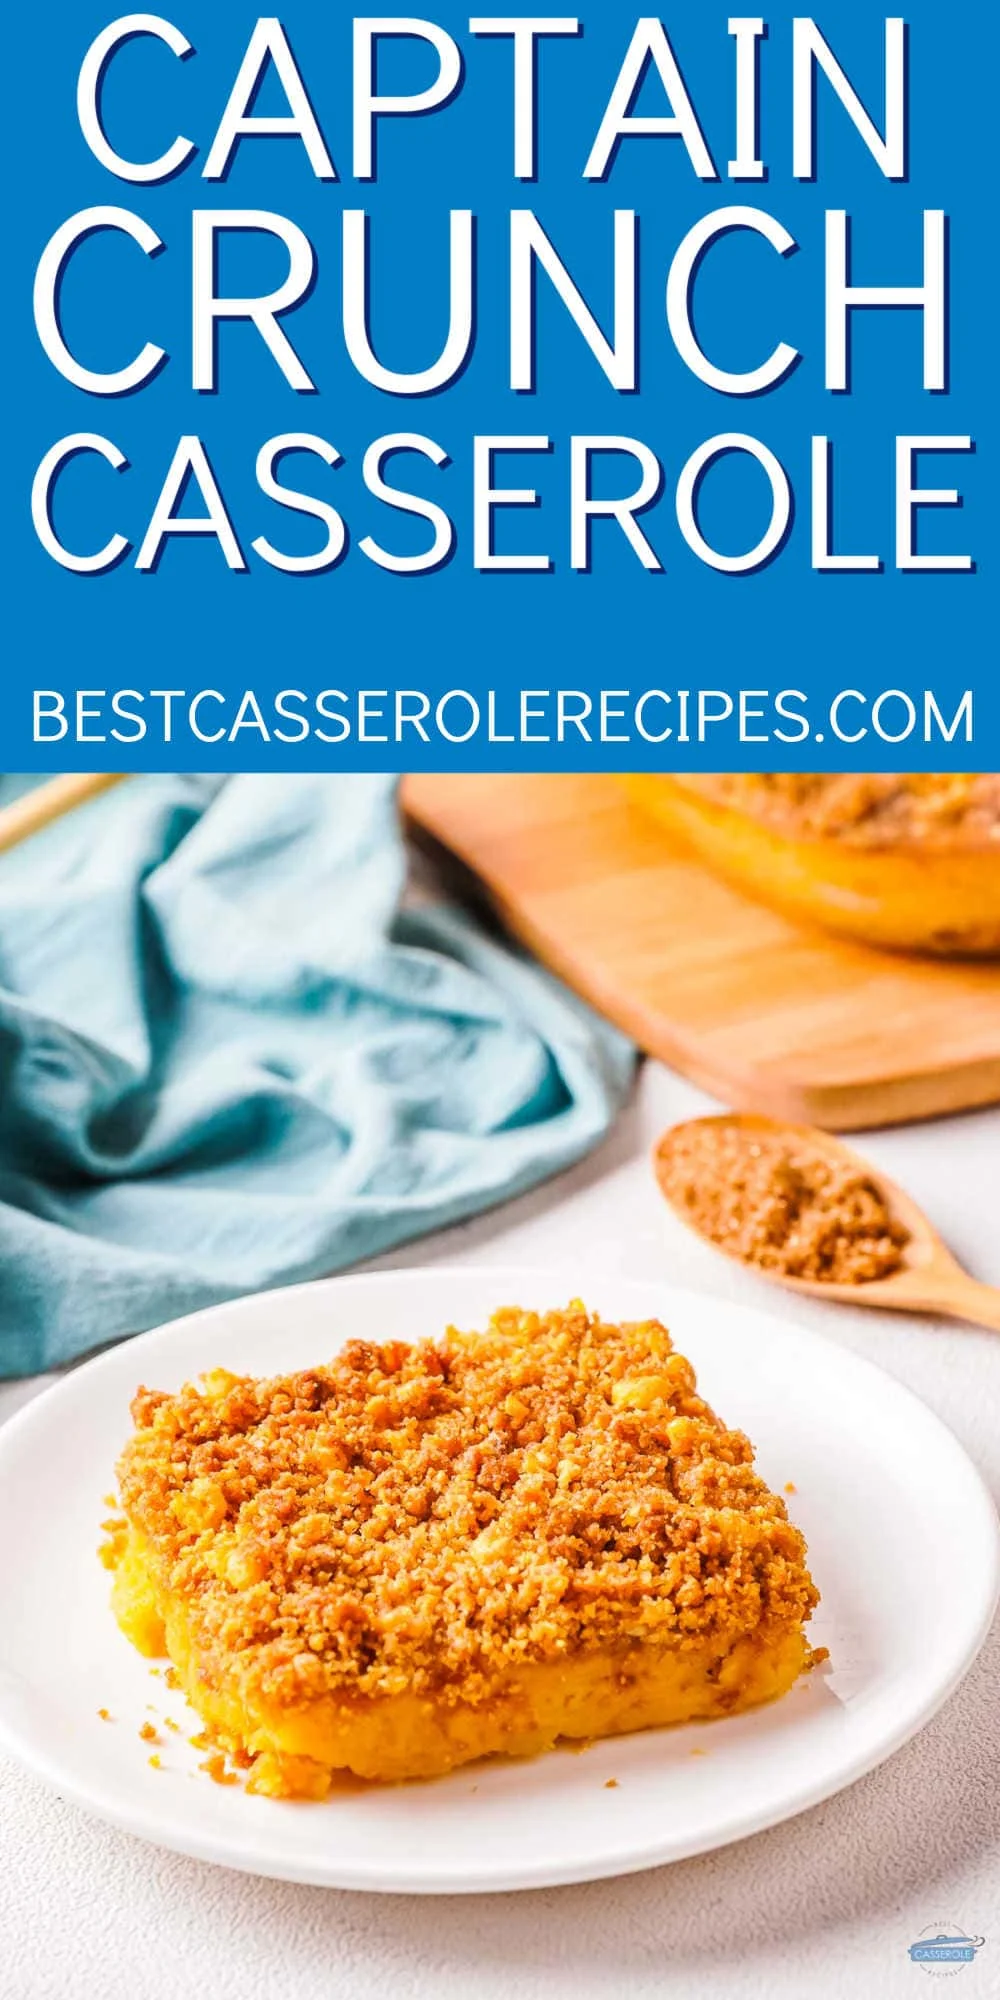 captain crunch casserole with a blue banner and white text